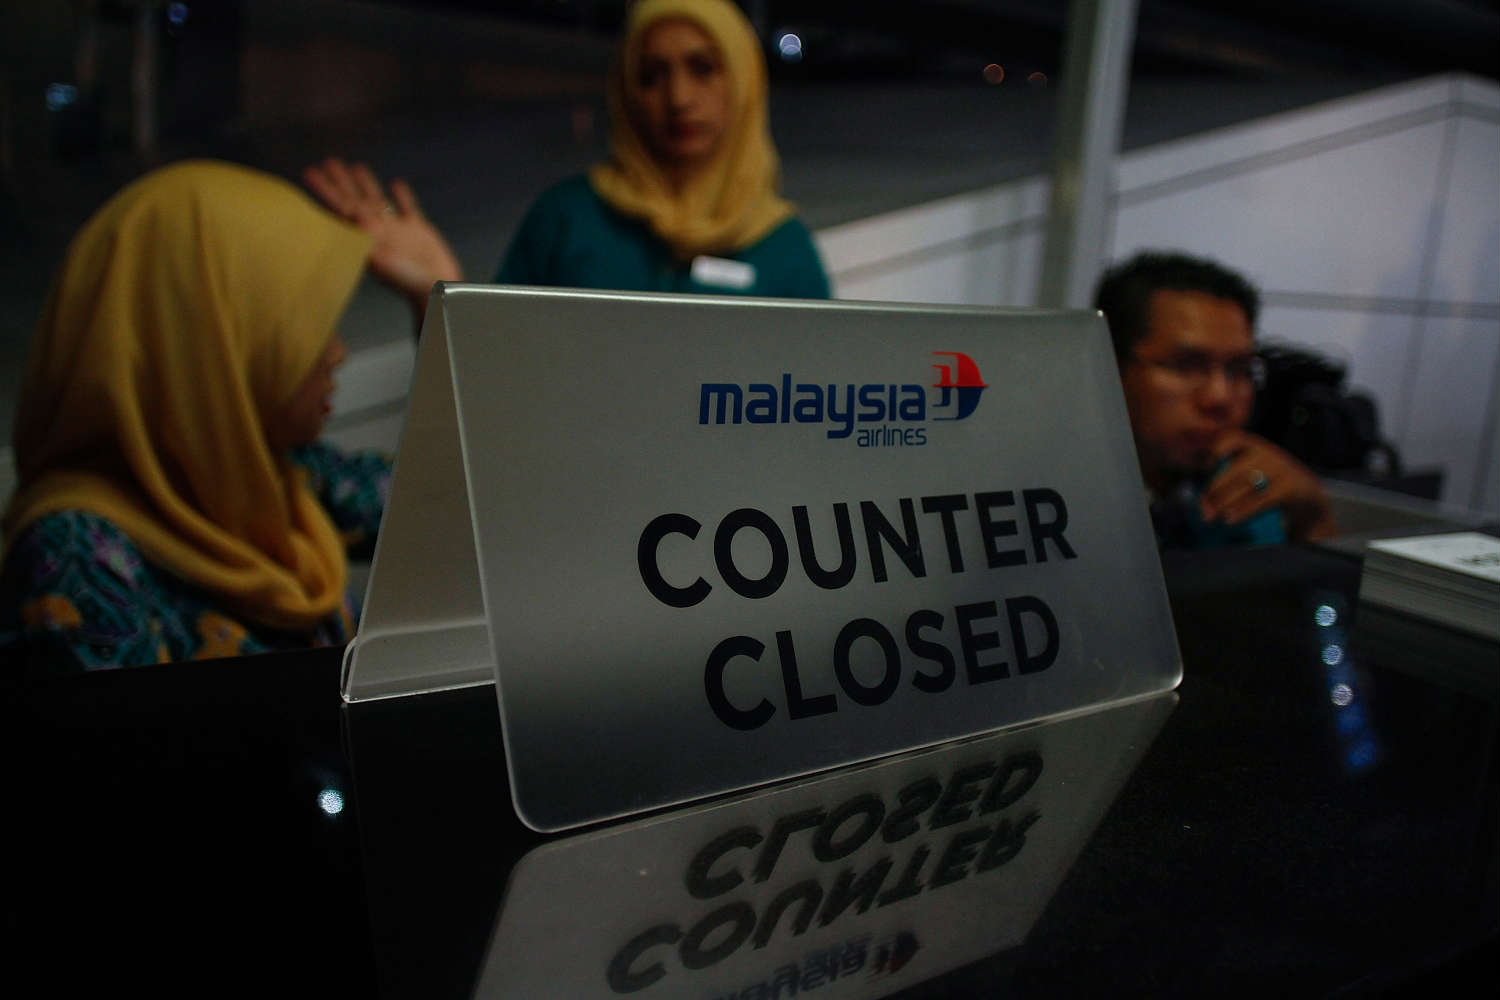 Malaysia Airlines hit again